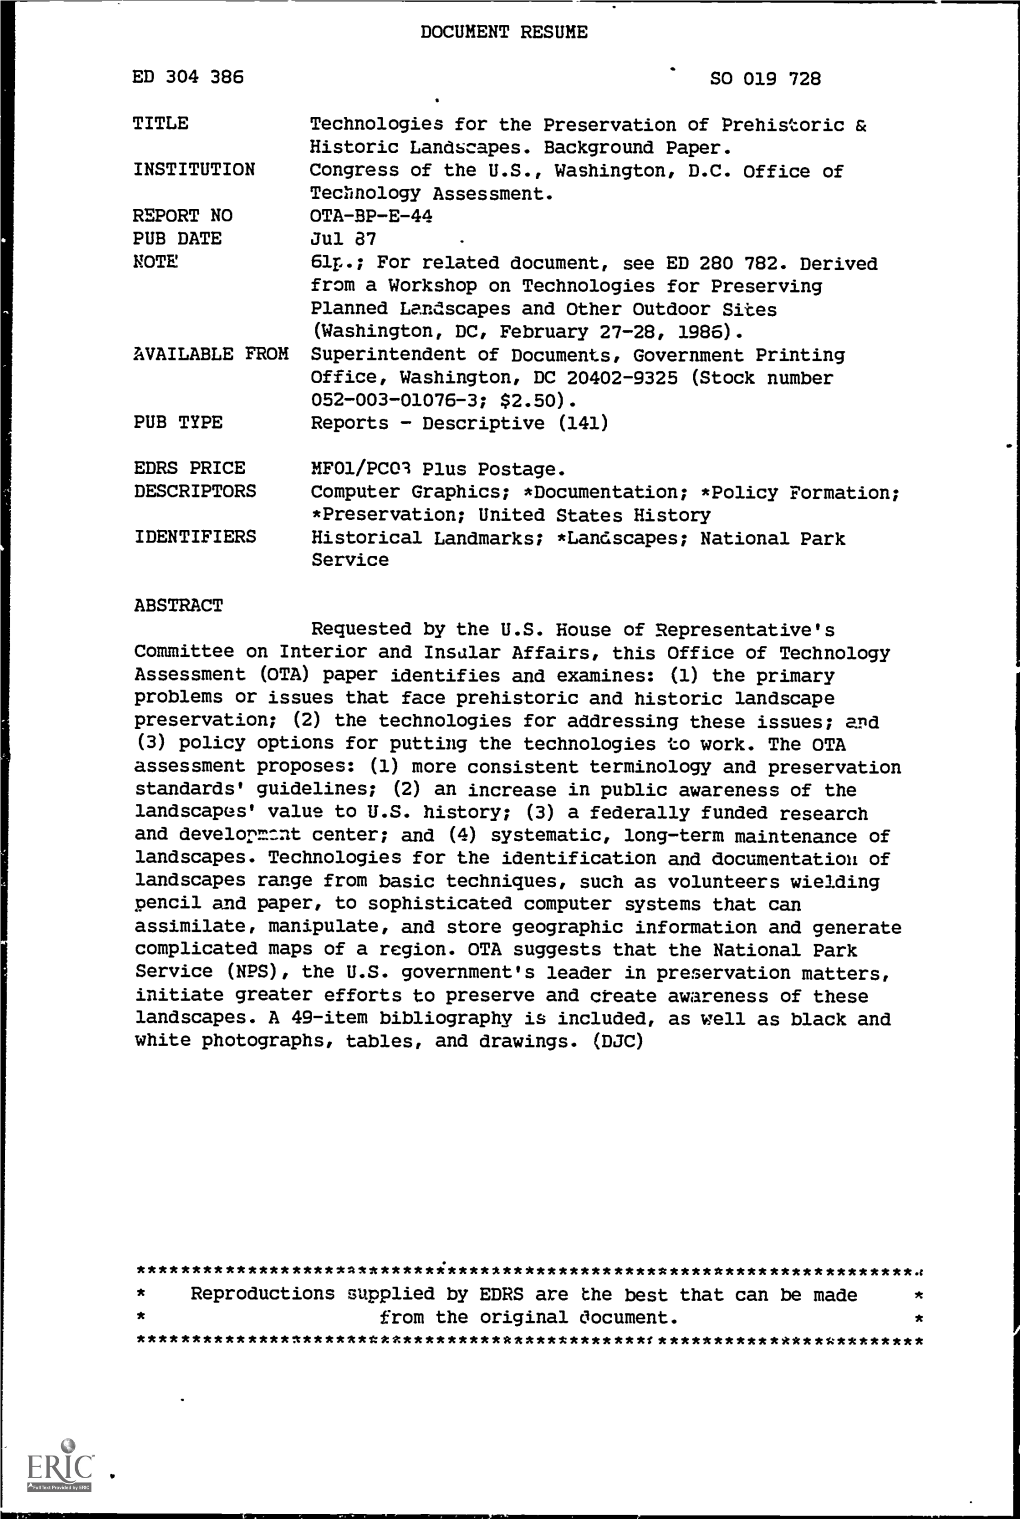 DOCUMENT RESUME ED 304 386 SO 019 728 TITLE Technologies For